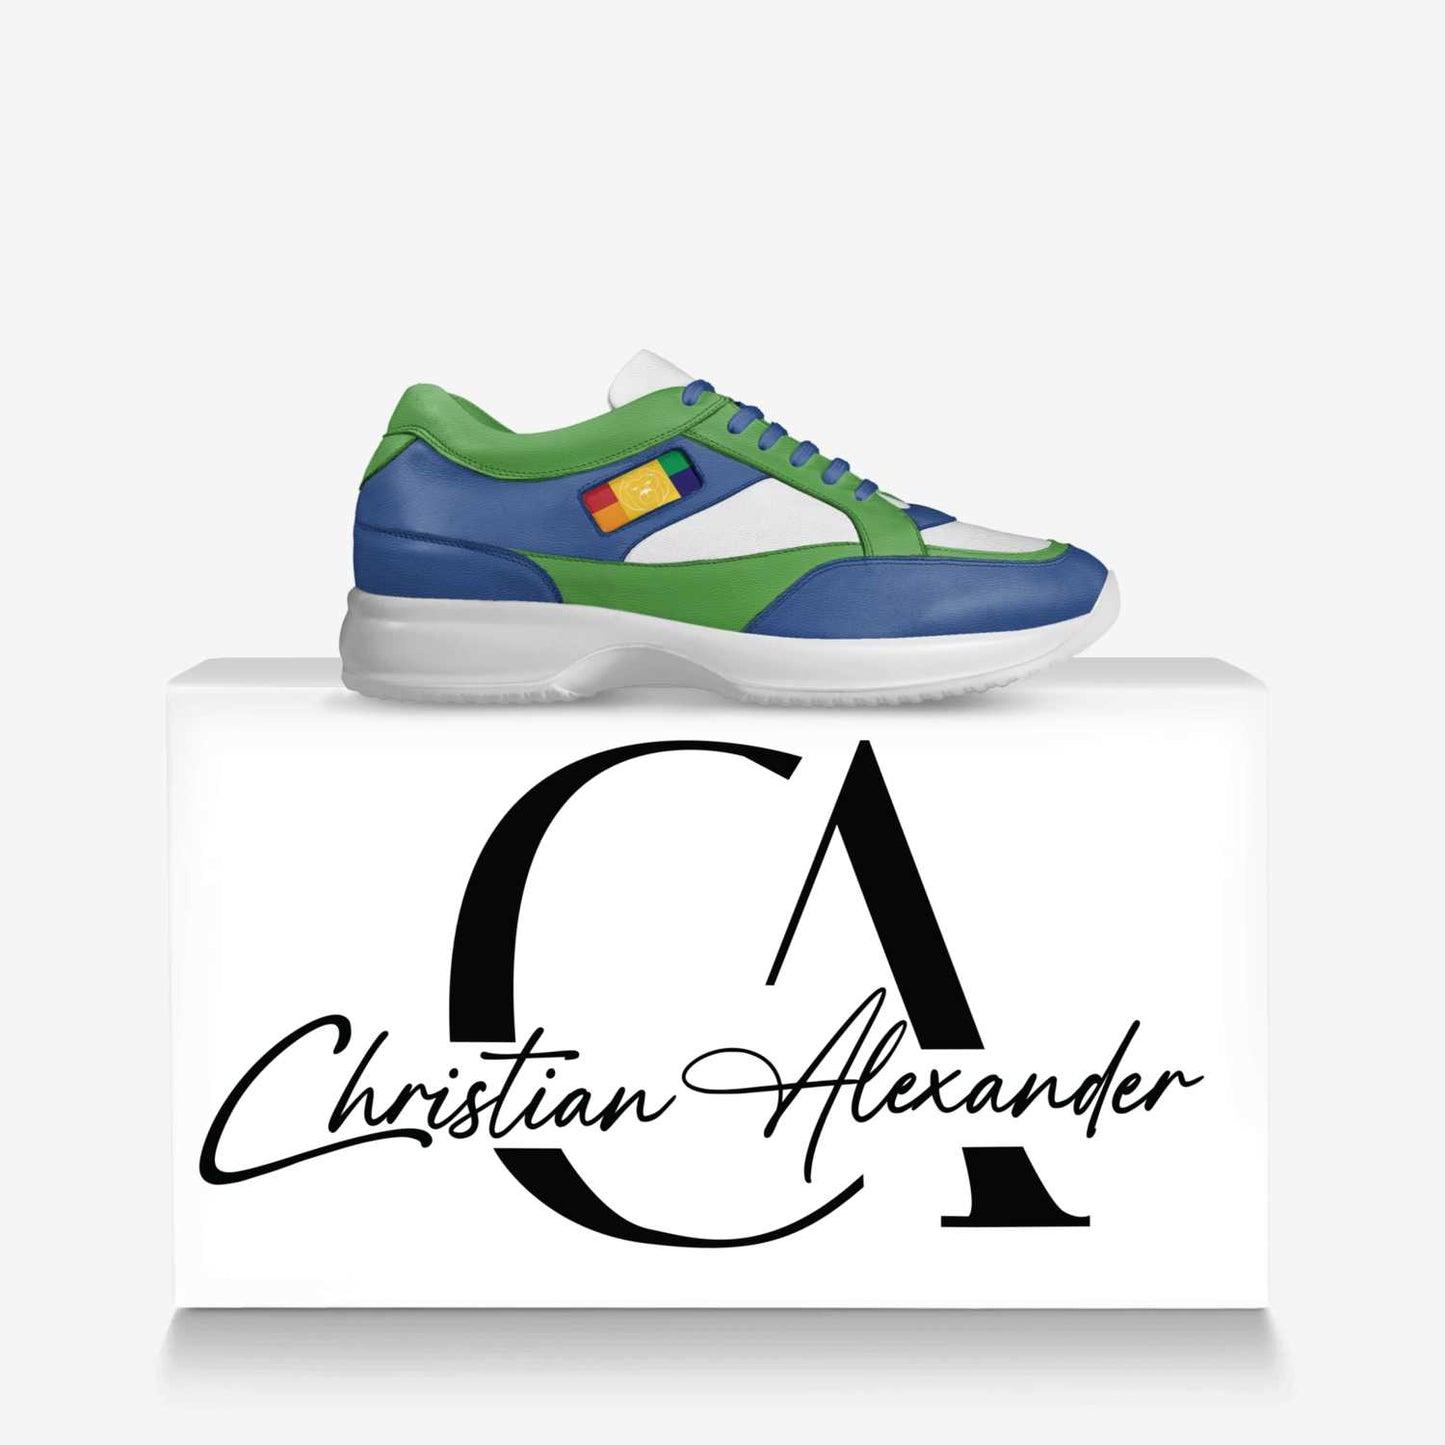 Divine Elevation Sneakers by Christian Alexander